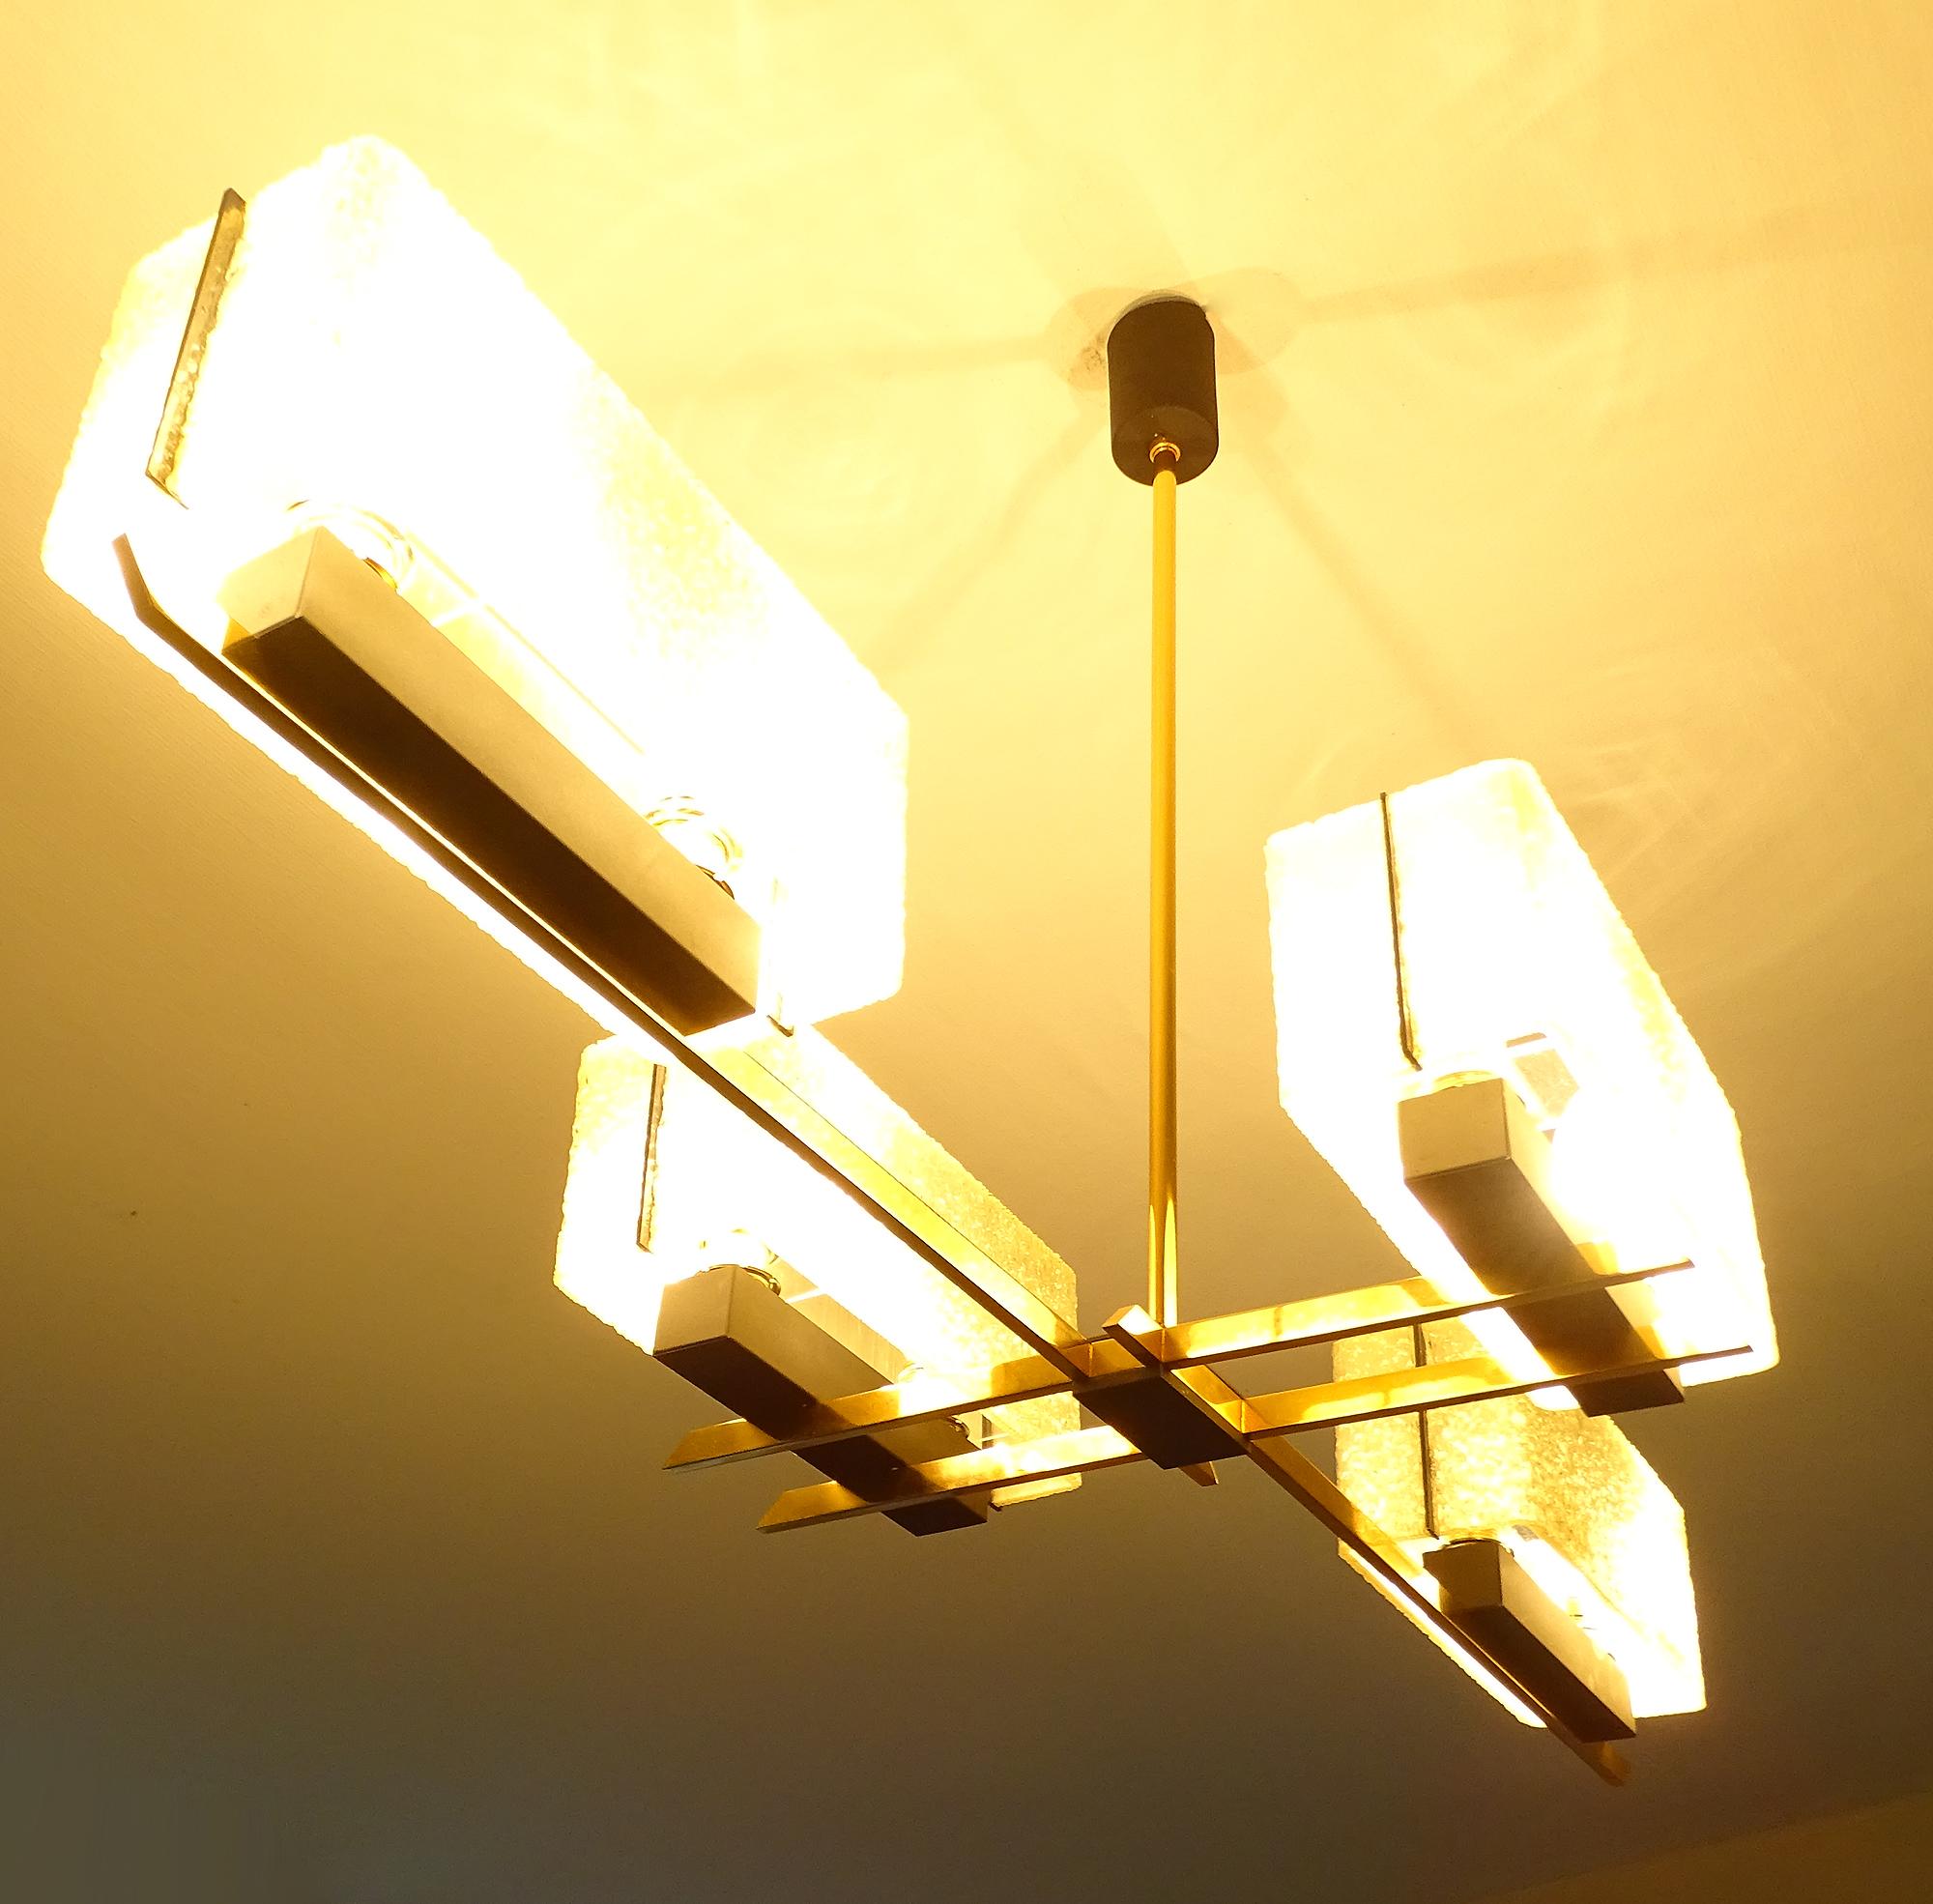 Exceptionnal large linear chandelier by the 1960s French lighting designer Maison Arlus (Arts et Lustre) featuring four rectangular off-white wavy and textured fiberglass light shades with a black perspex accent, placed on a brass cross shaped